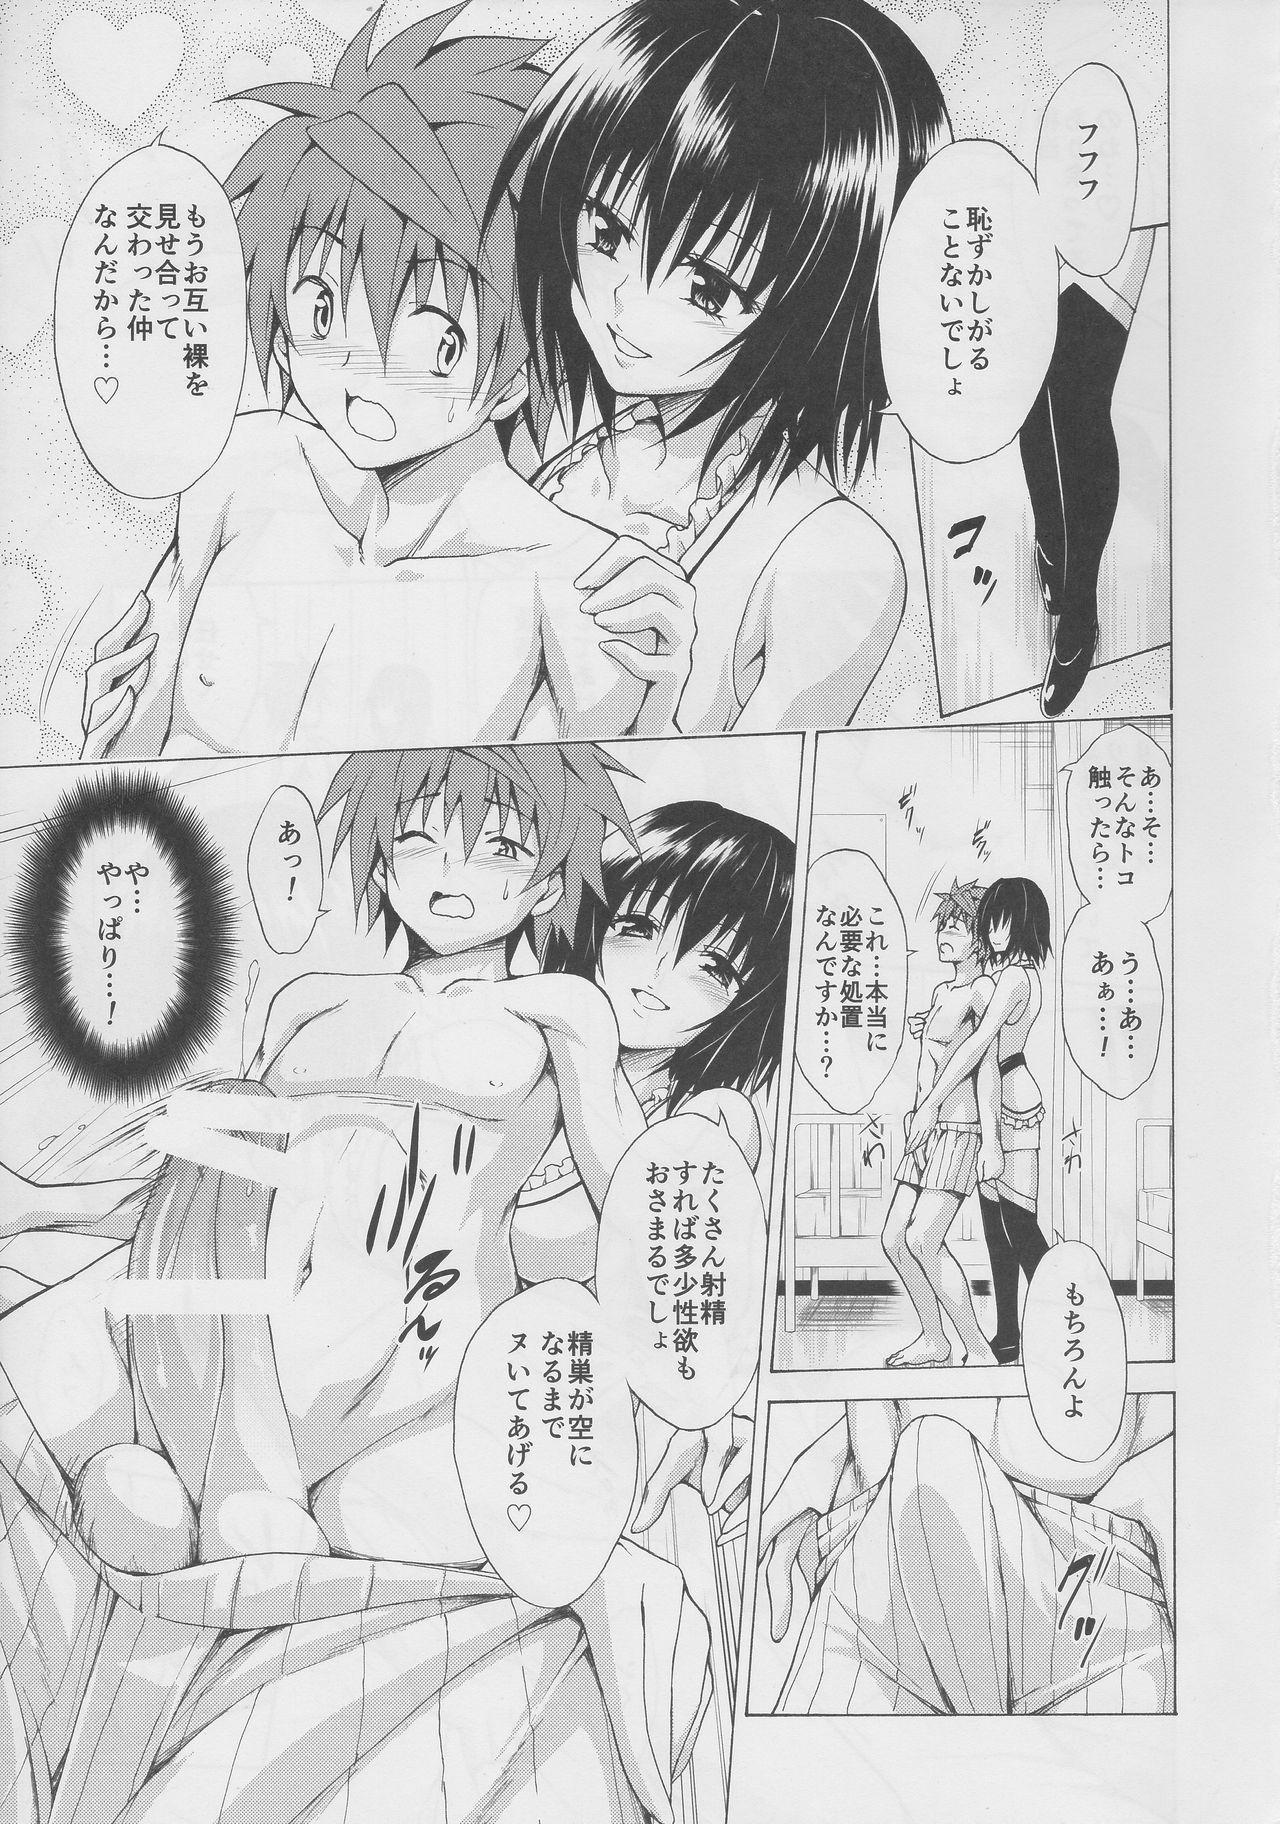 Rough Porn Trouble Teachers Vol. 4 - To love ru Muscle - Page 5